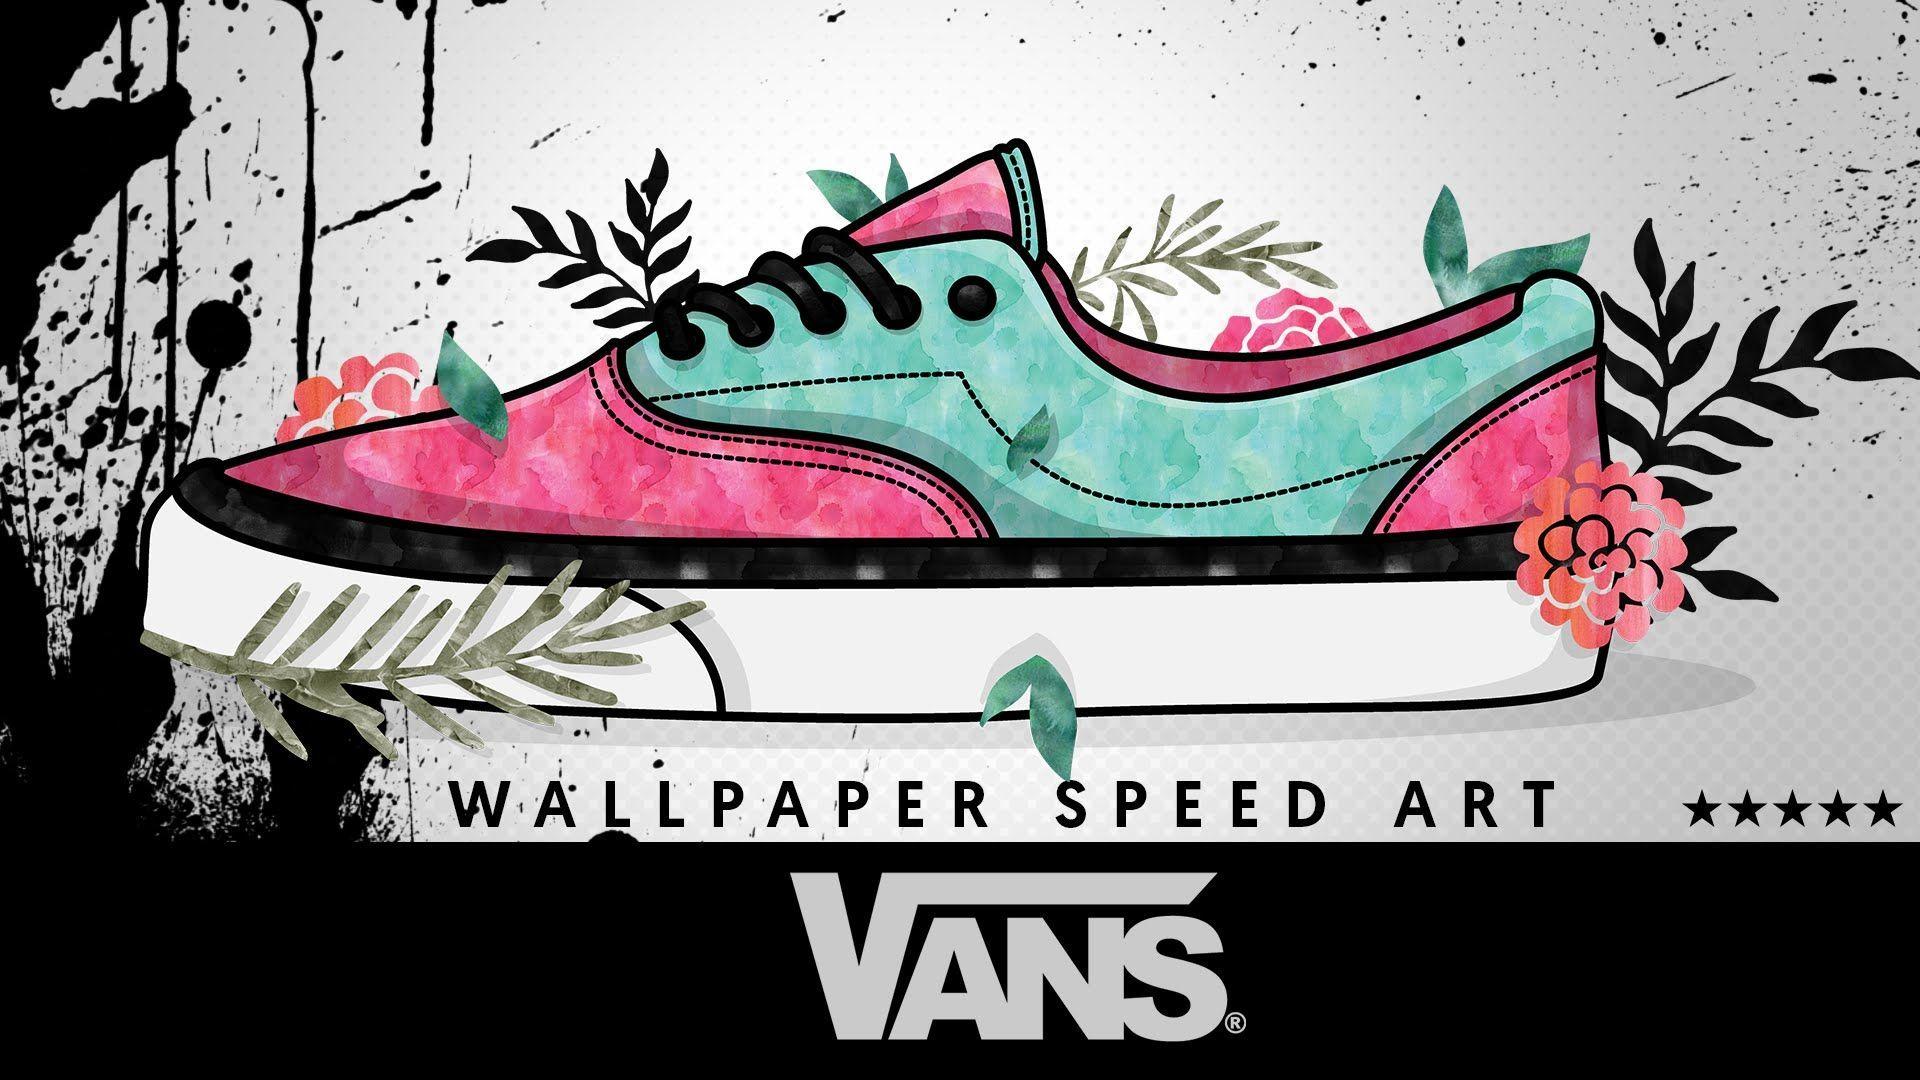 Black Vans Off The Wall Logo Picture White Wallpaper HD For iPhone